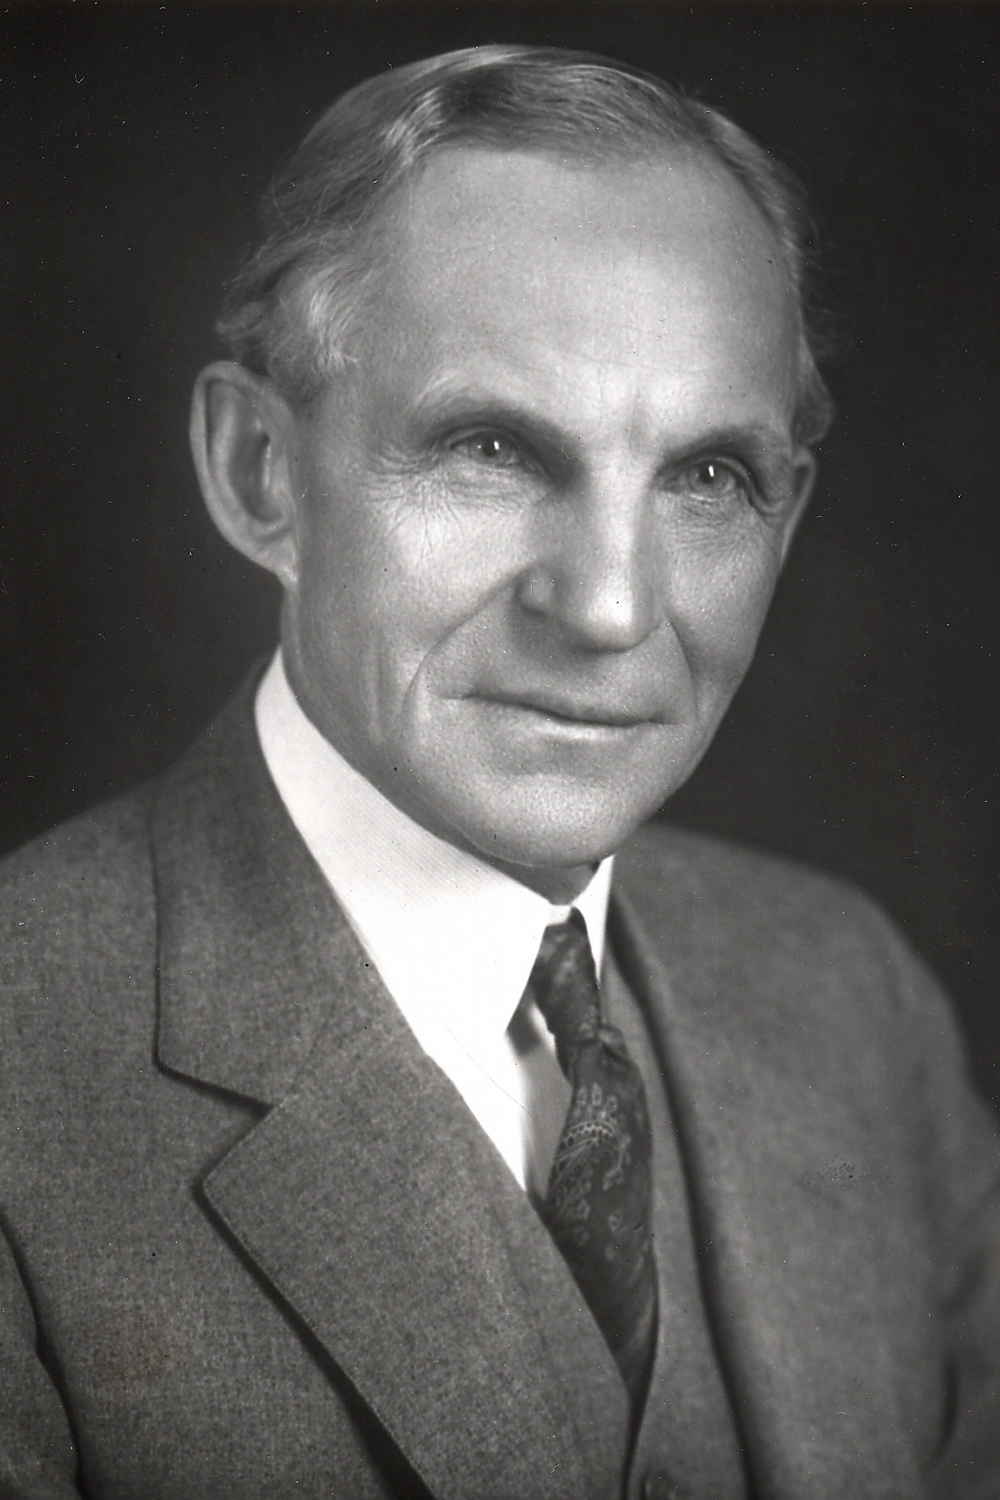 A photo of Henry Ford